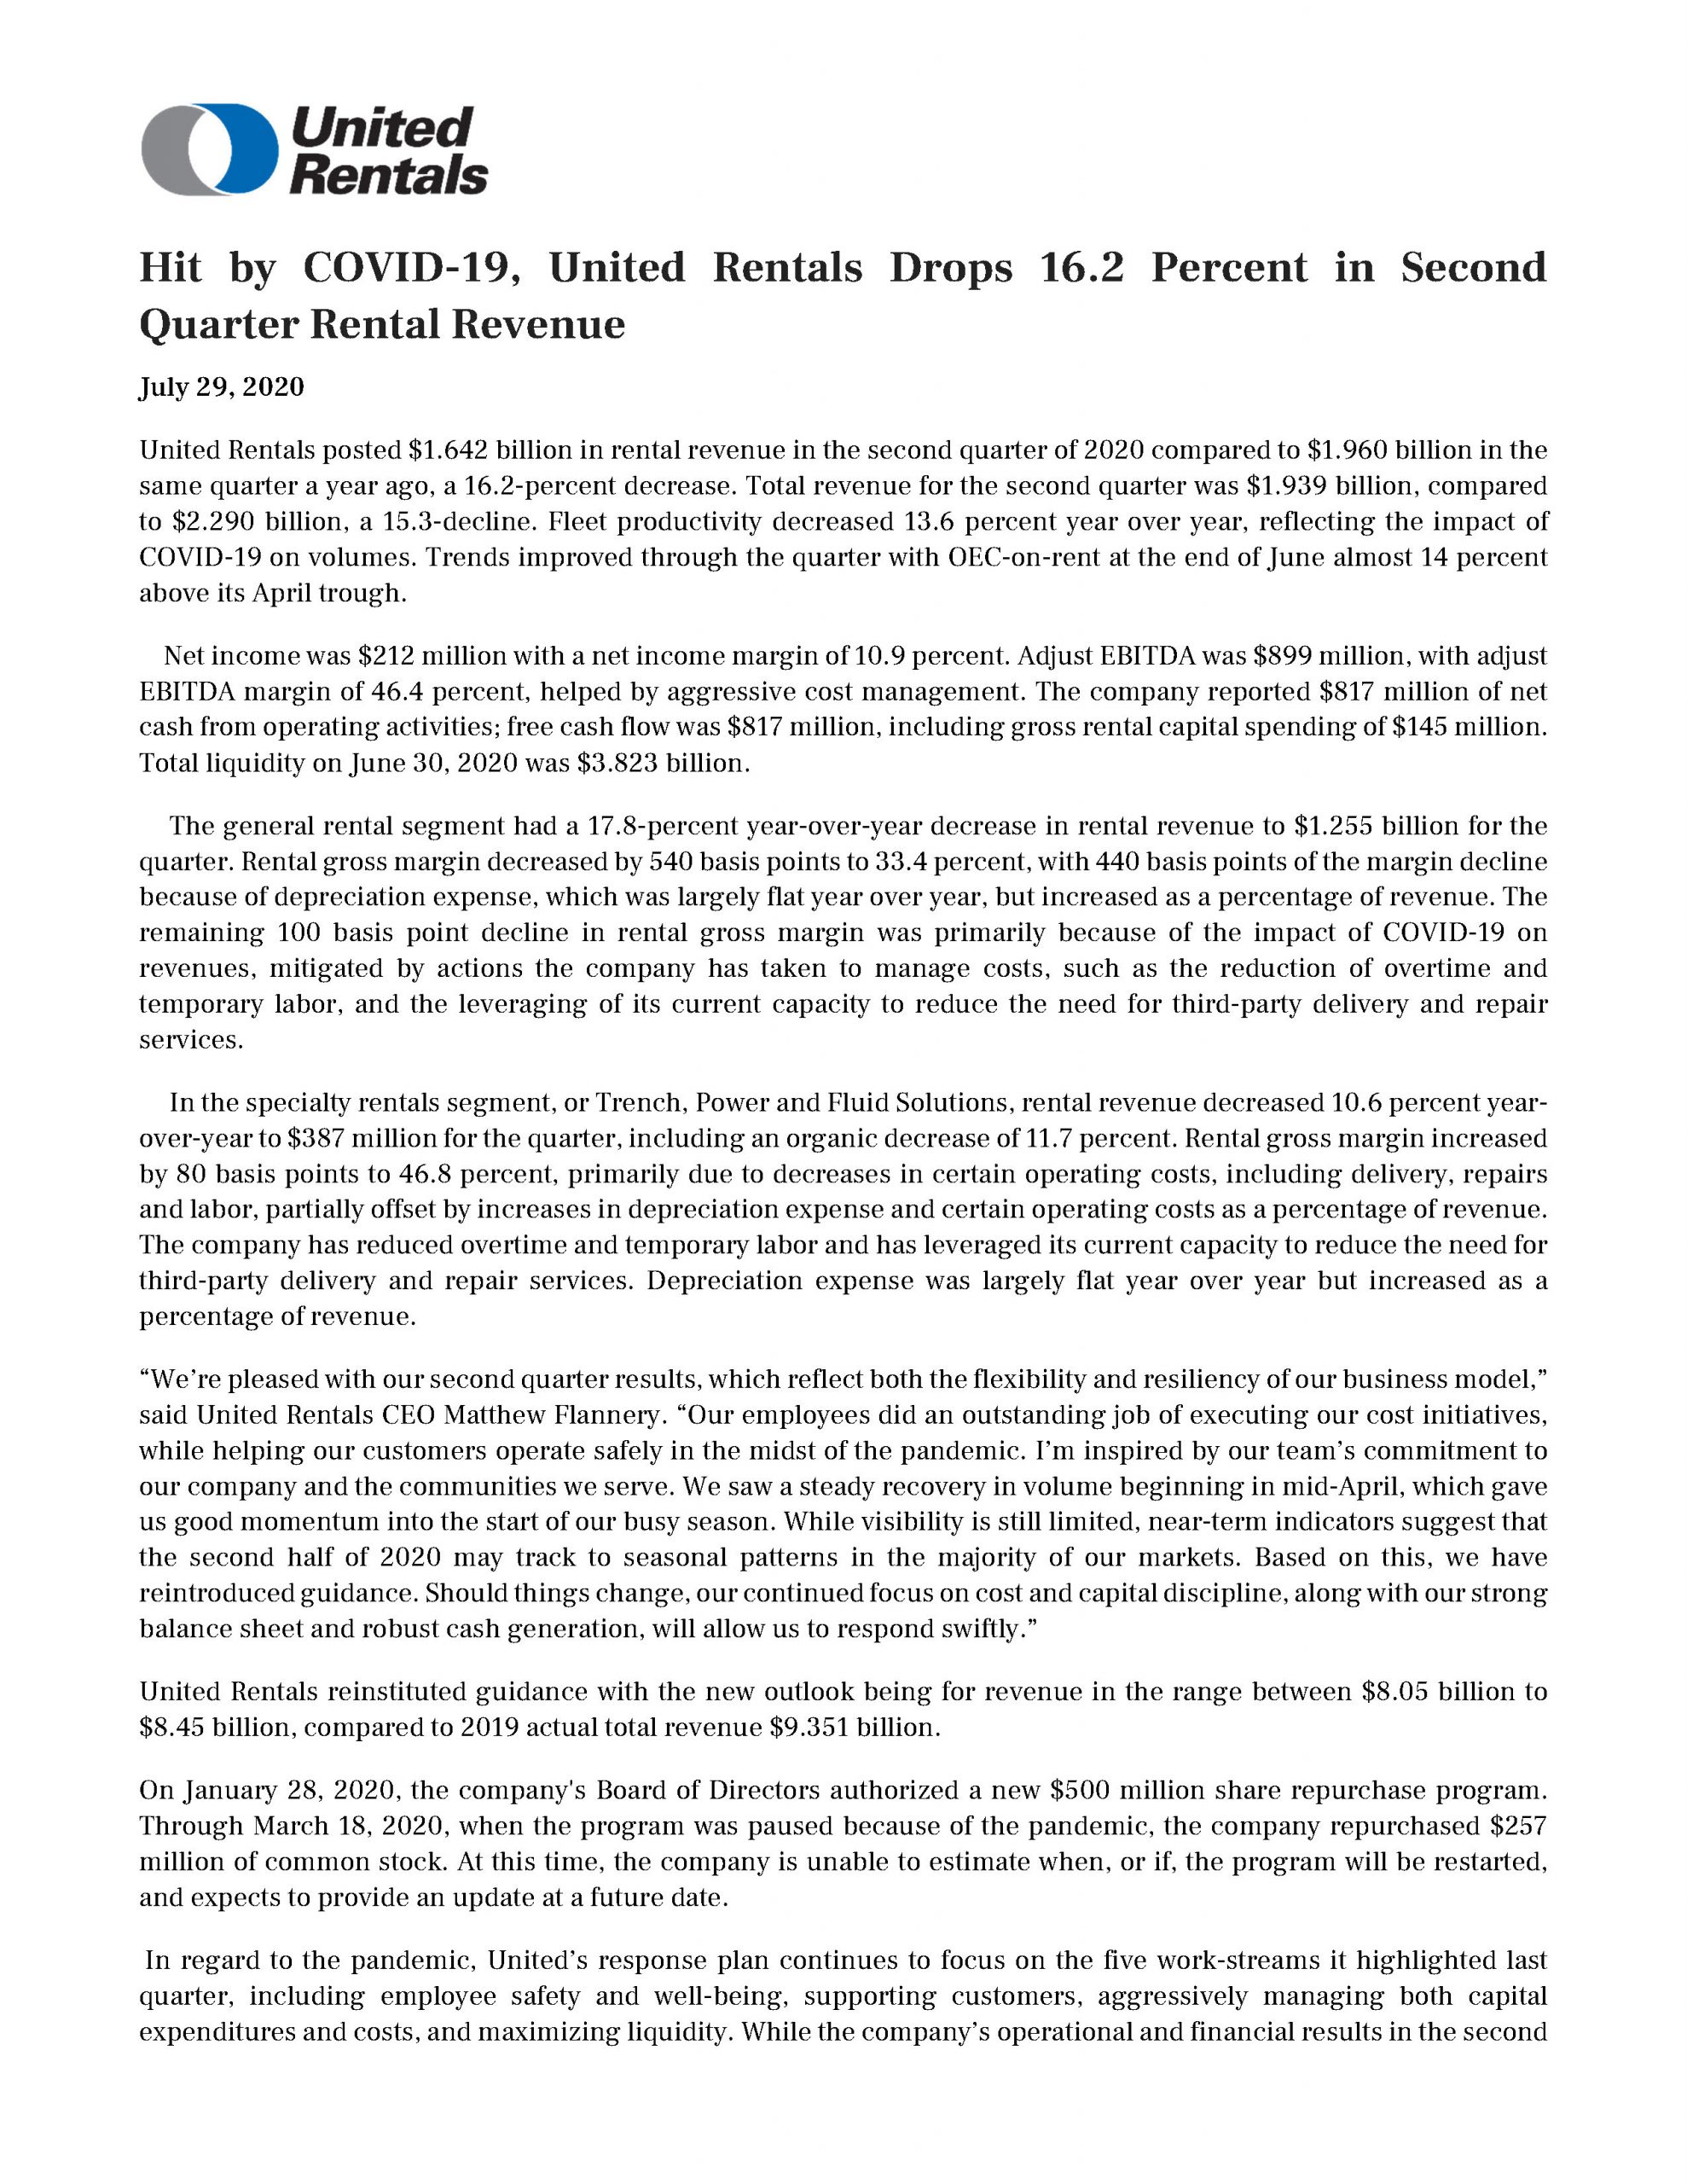 Hit by COVID-19, United Rentals Drops 16.2 Percent in the Second Quarter Rental Revenue 7.29.2020_Page_1